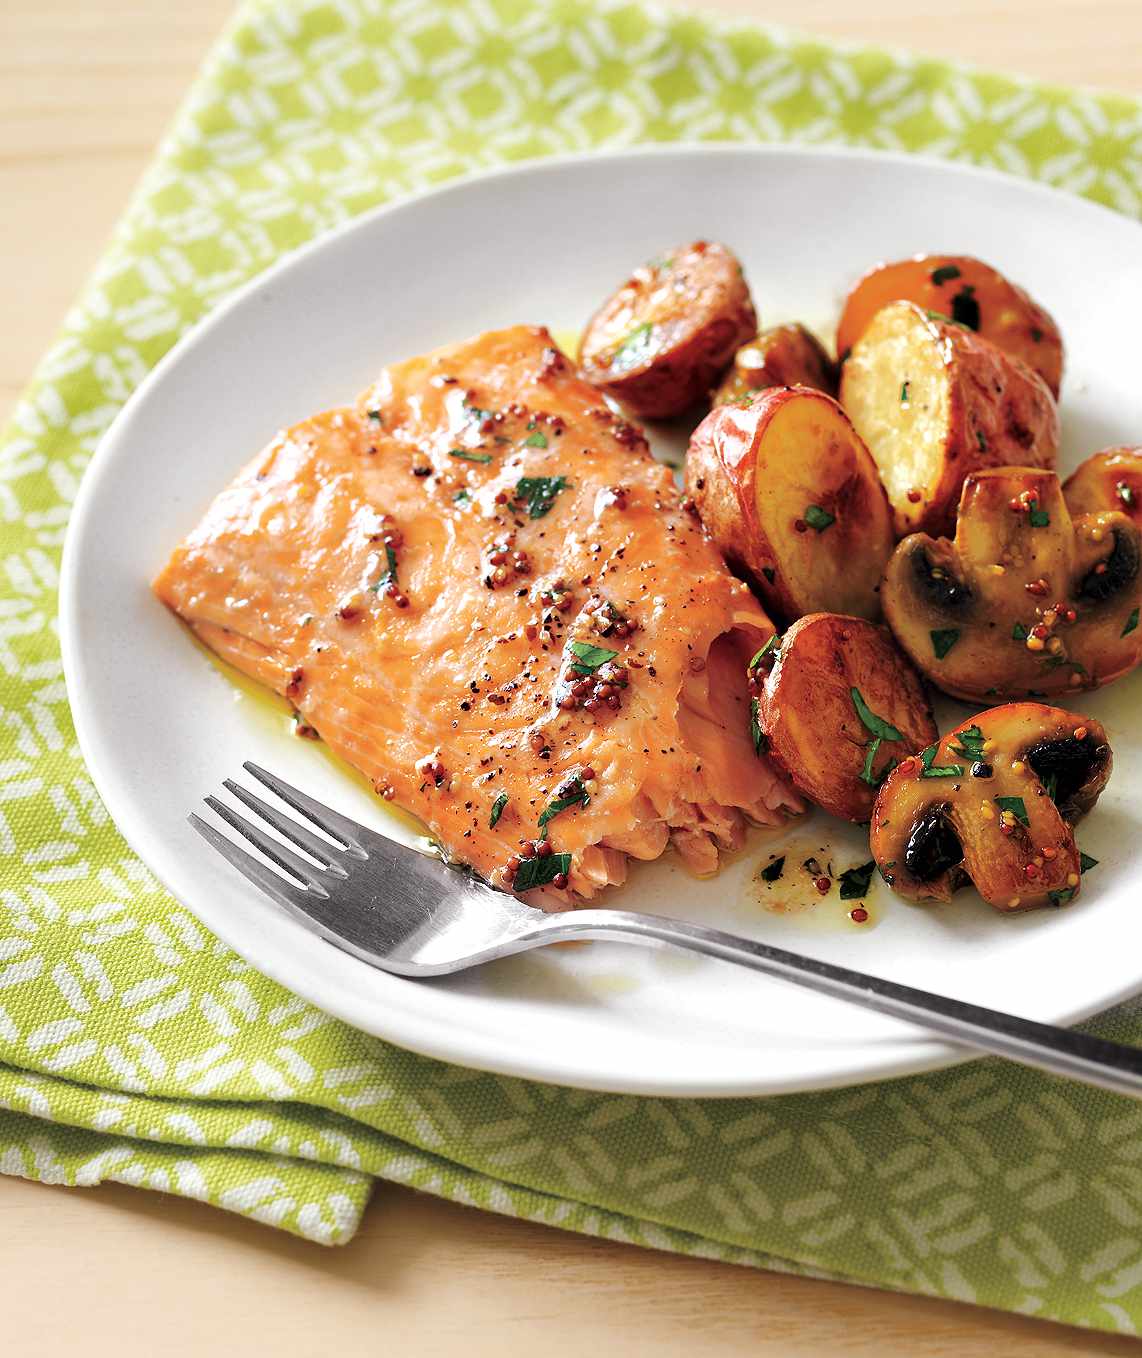 17. Roasted Salmon With Potatoes and Mushrooms